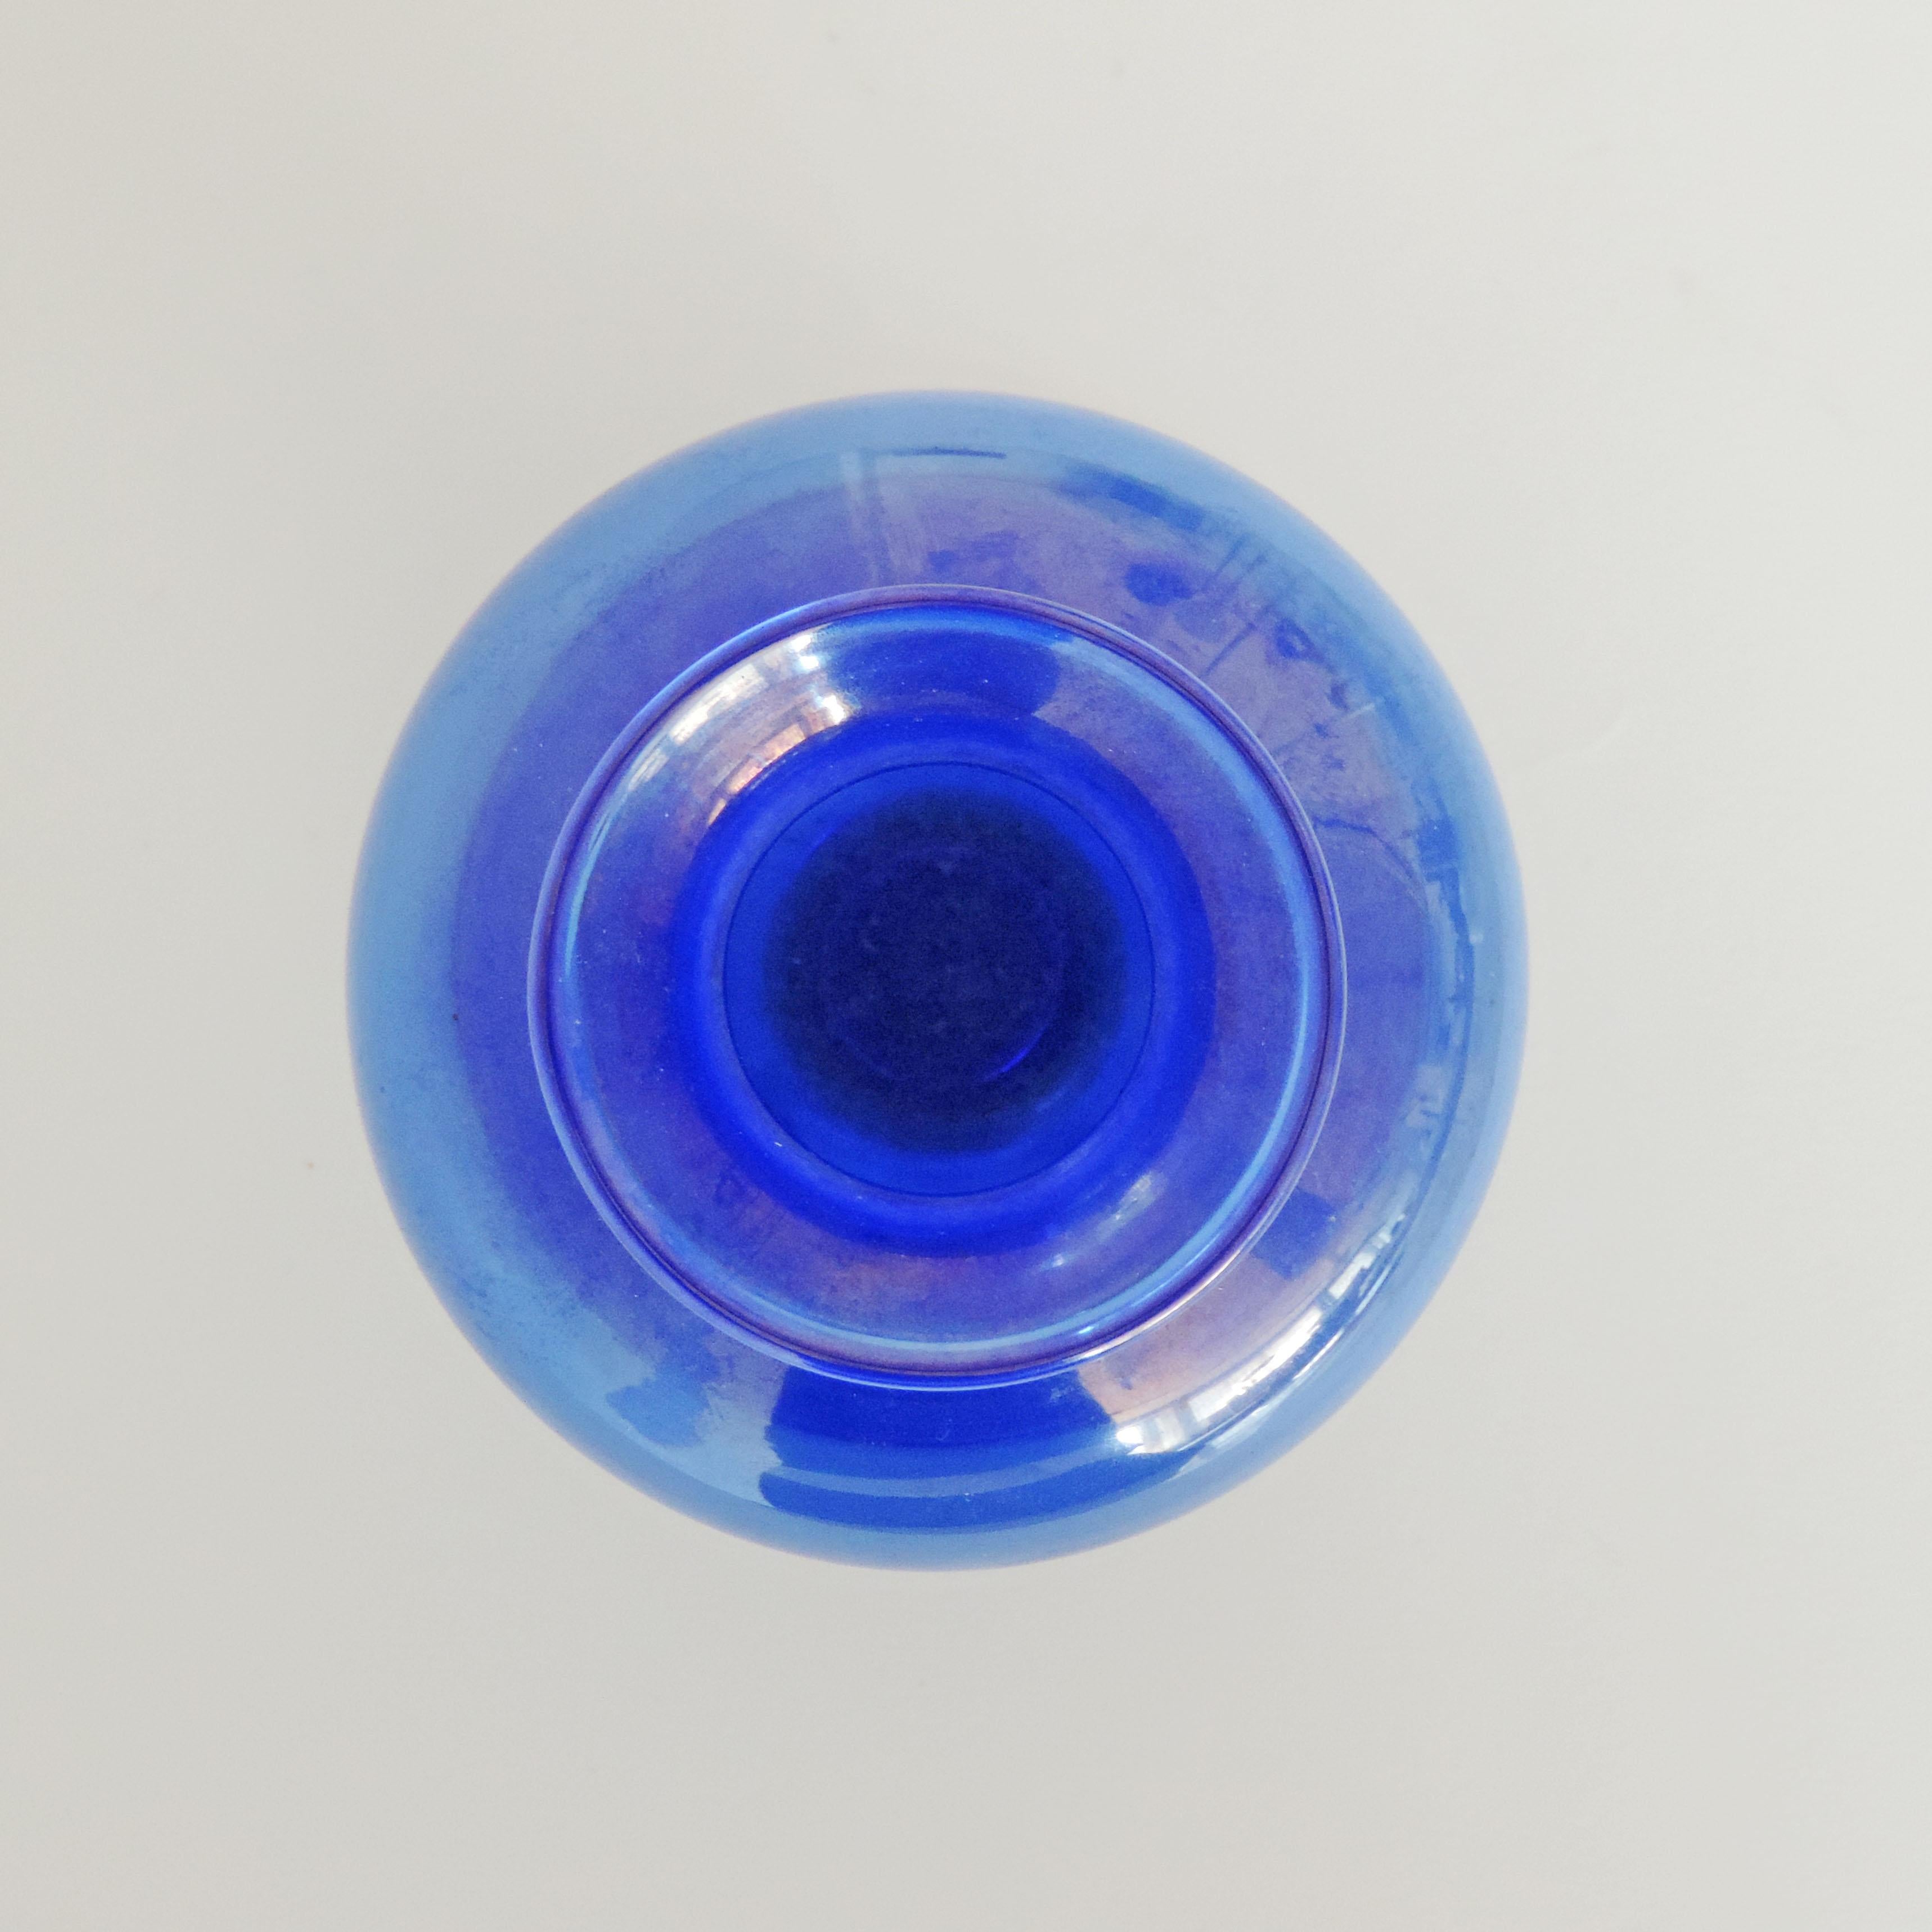 M.V.M Cappellin Murano Glass Vase Model No. 5383 in Blue, Italy, 1920s In Excellent Condition For Sale In Milan, IT